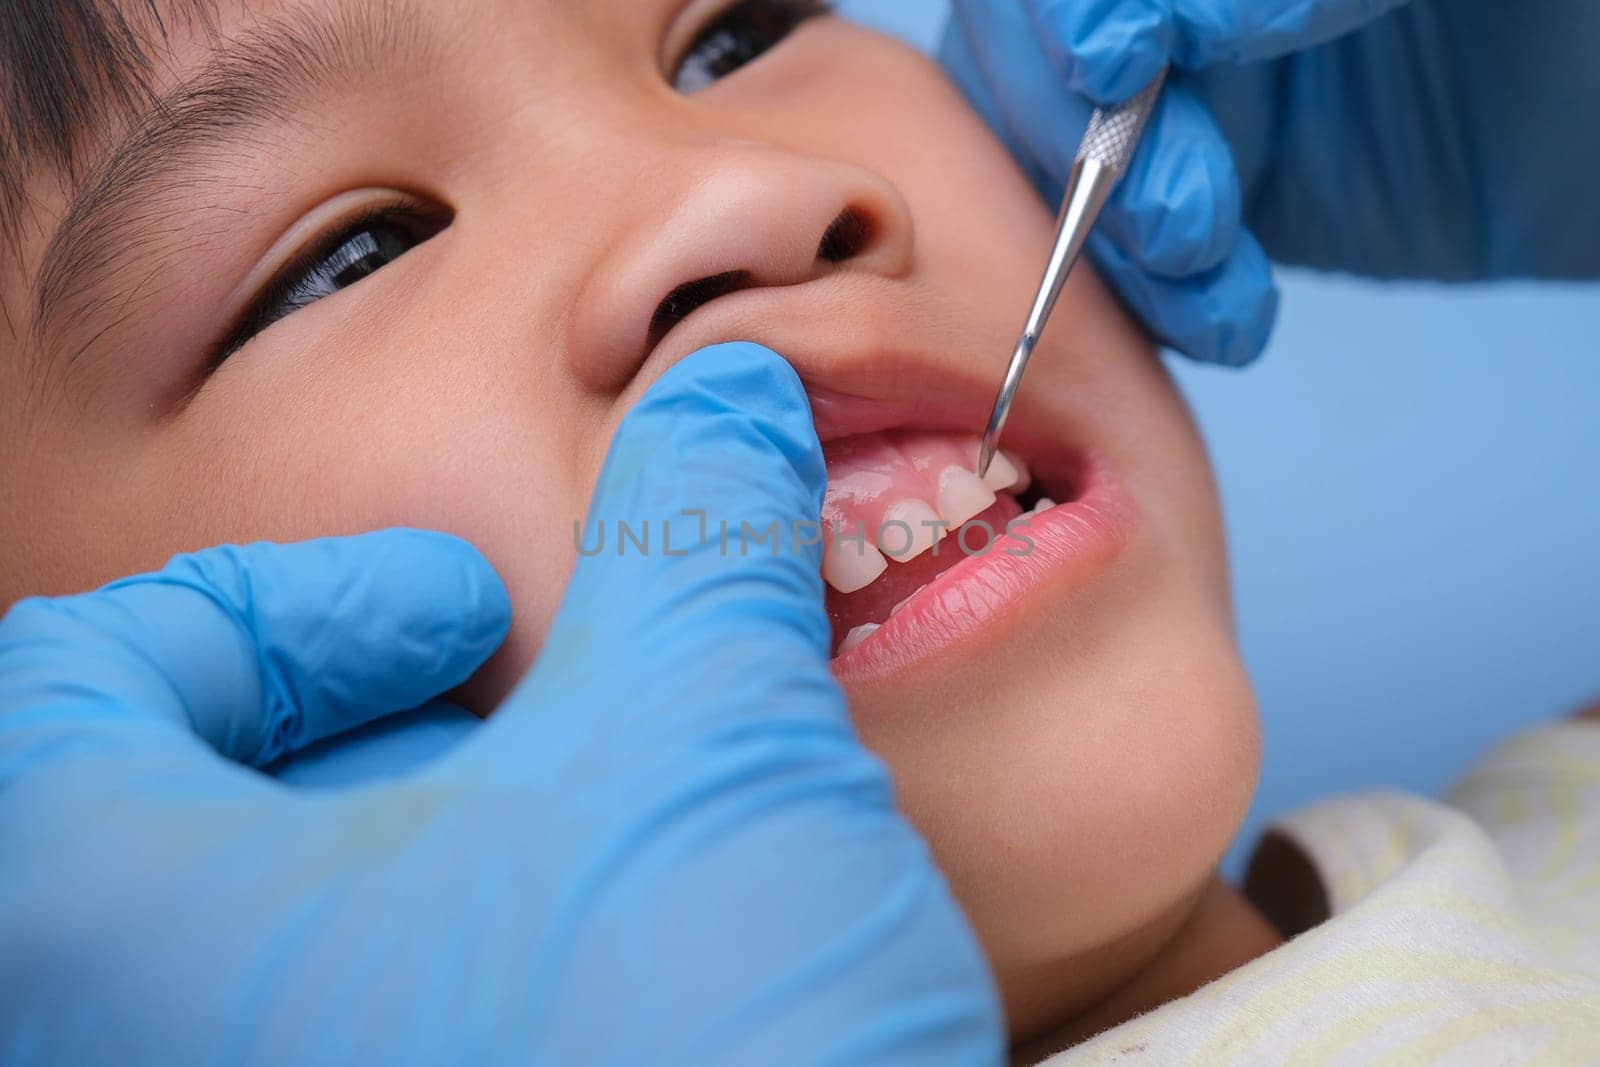 Close-up in the oral cavity of a healthy child with beautiful white teeth. Young girl opens her mouth to reveal healthy teeth, hard and soft palate. Dental and oral health check by TEERASAK